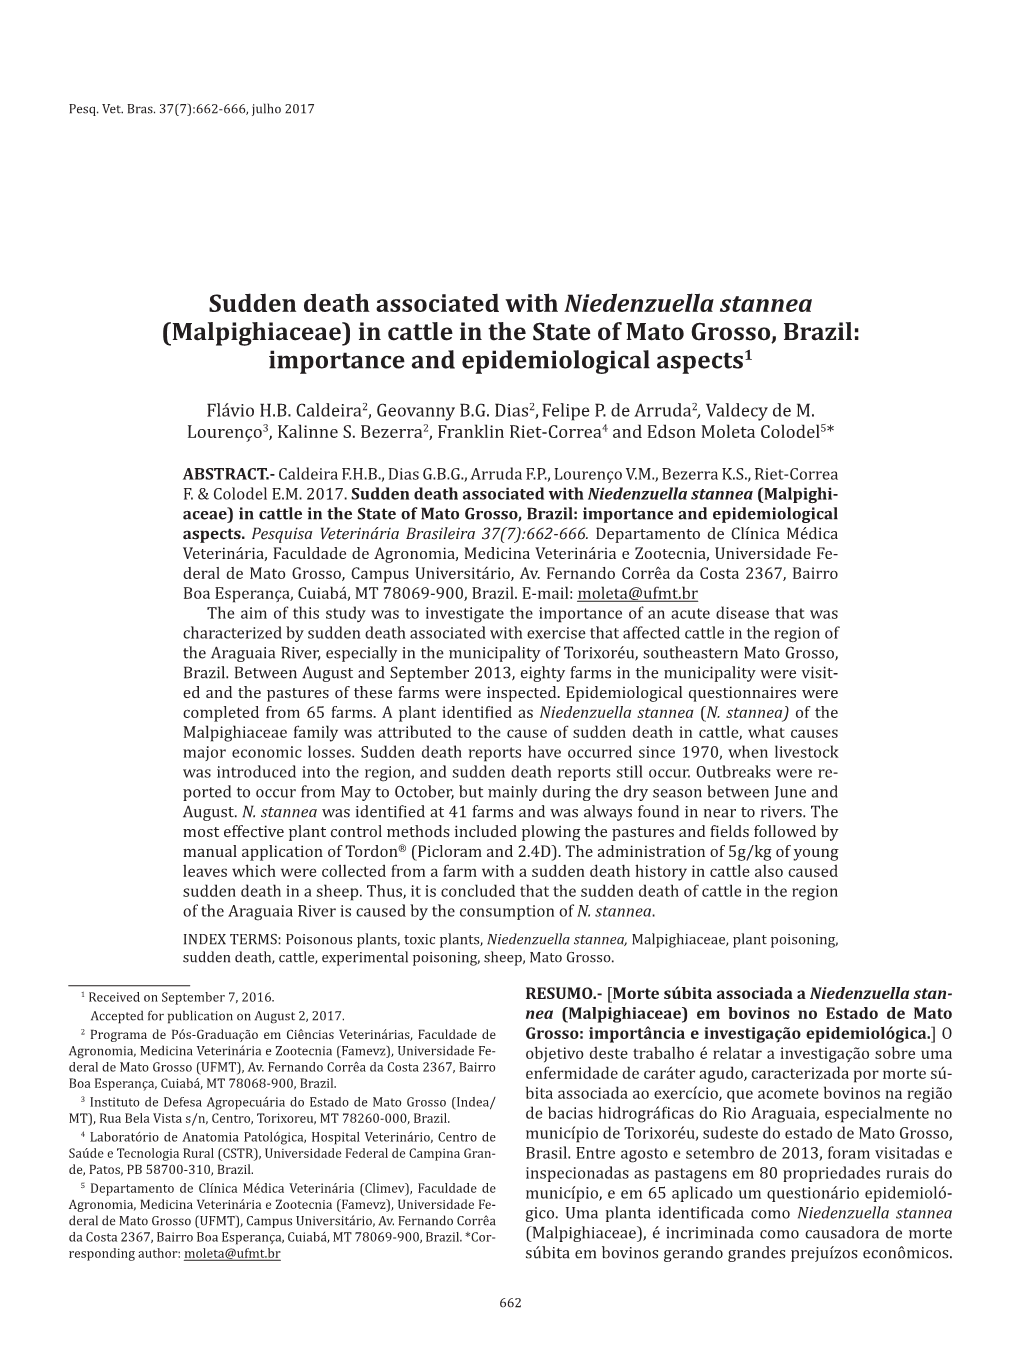 Sudden Death Associated with Niedenzuella Stannea (Malpighiaceae) in Cattle in the State of Mato Grosso, Brazil: Importance and Epidemiological Aspects1